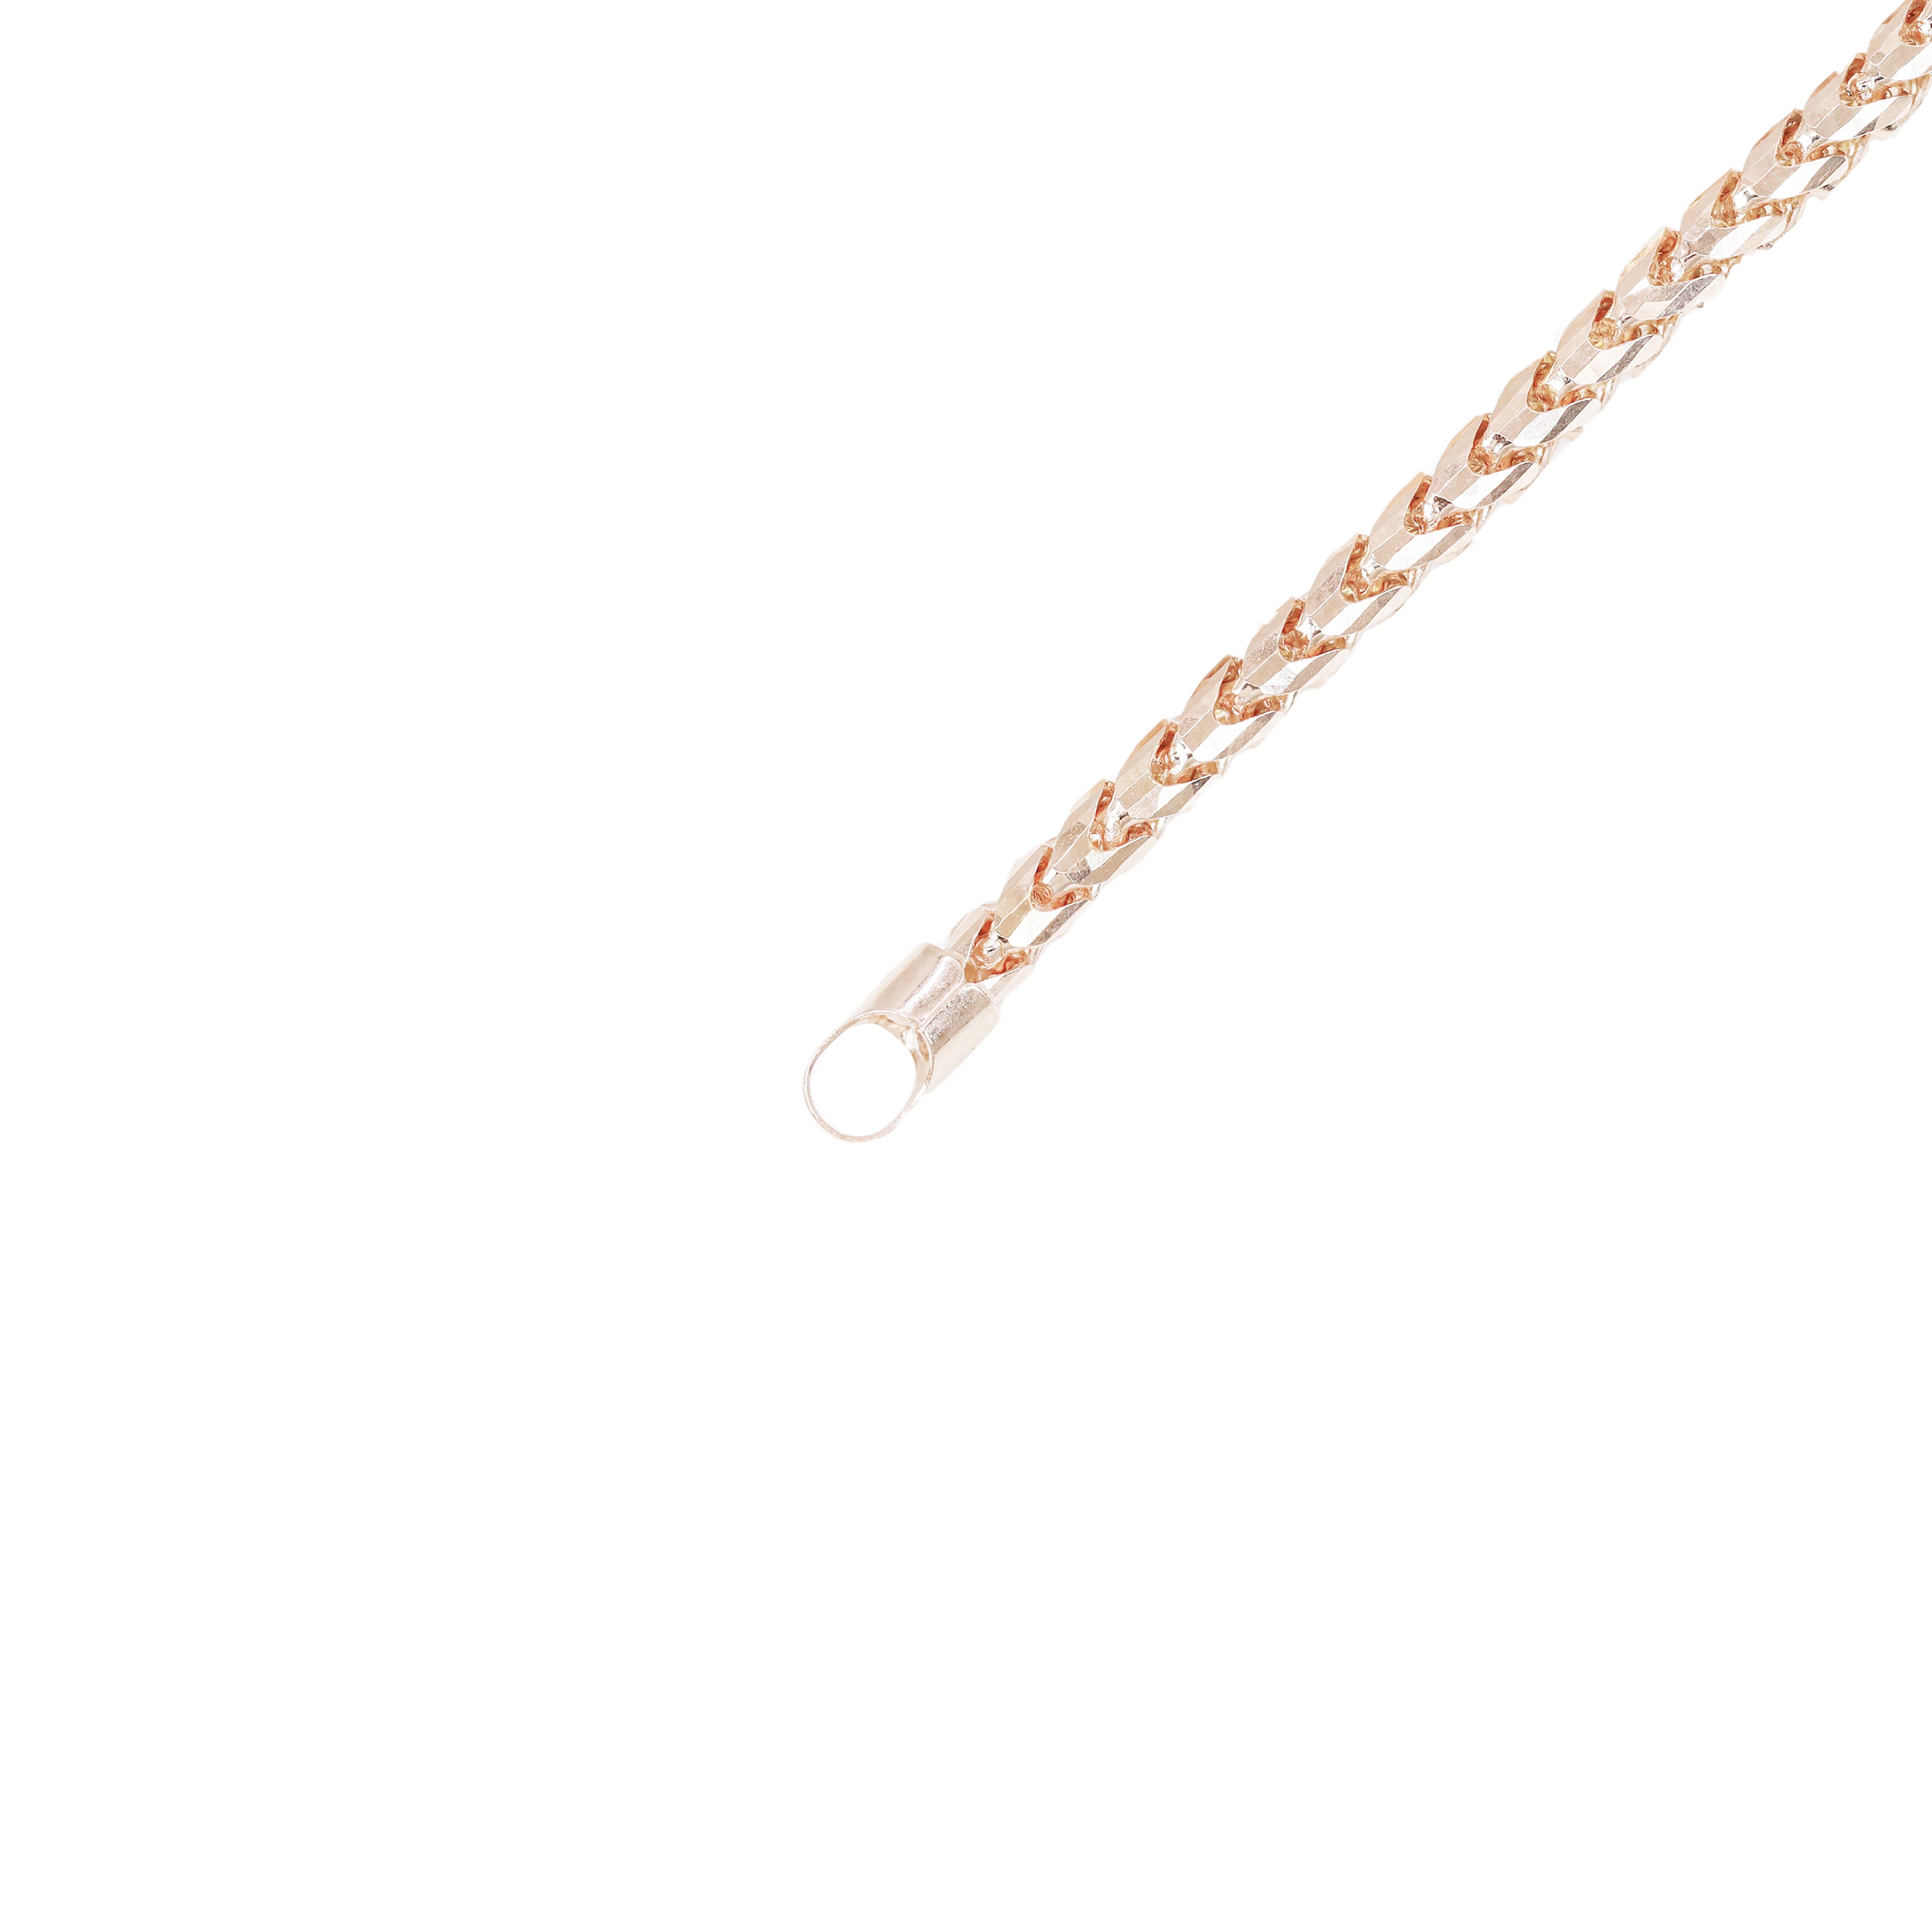 14KT Solid Rounded Franco Rose Gold Chain